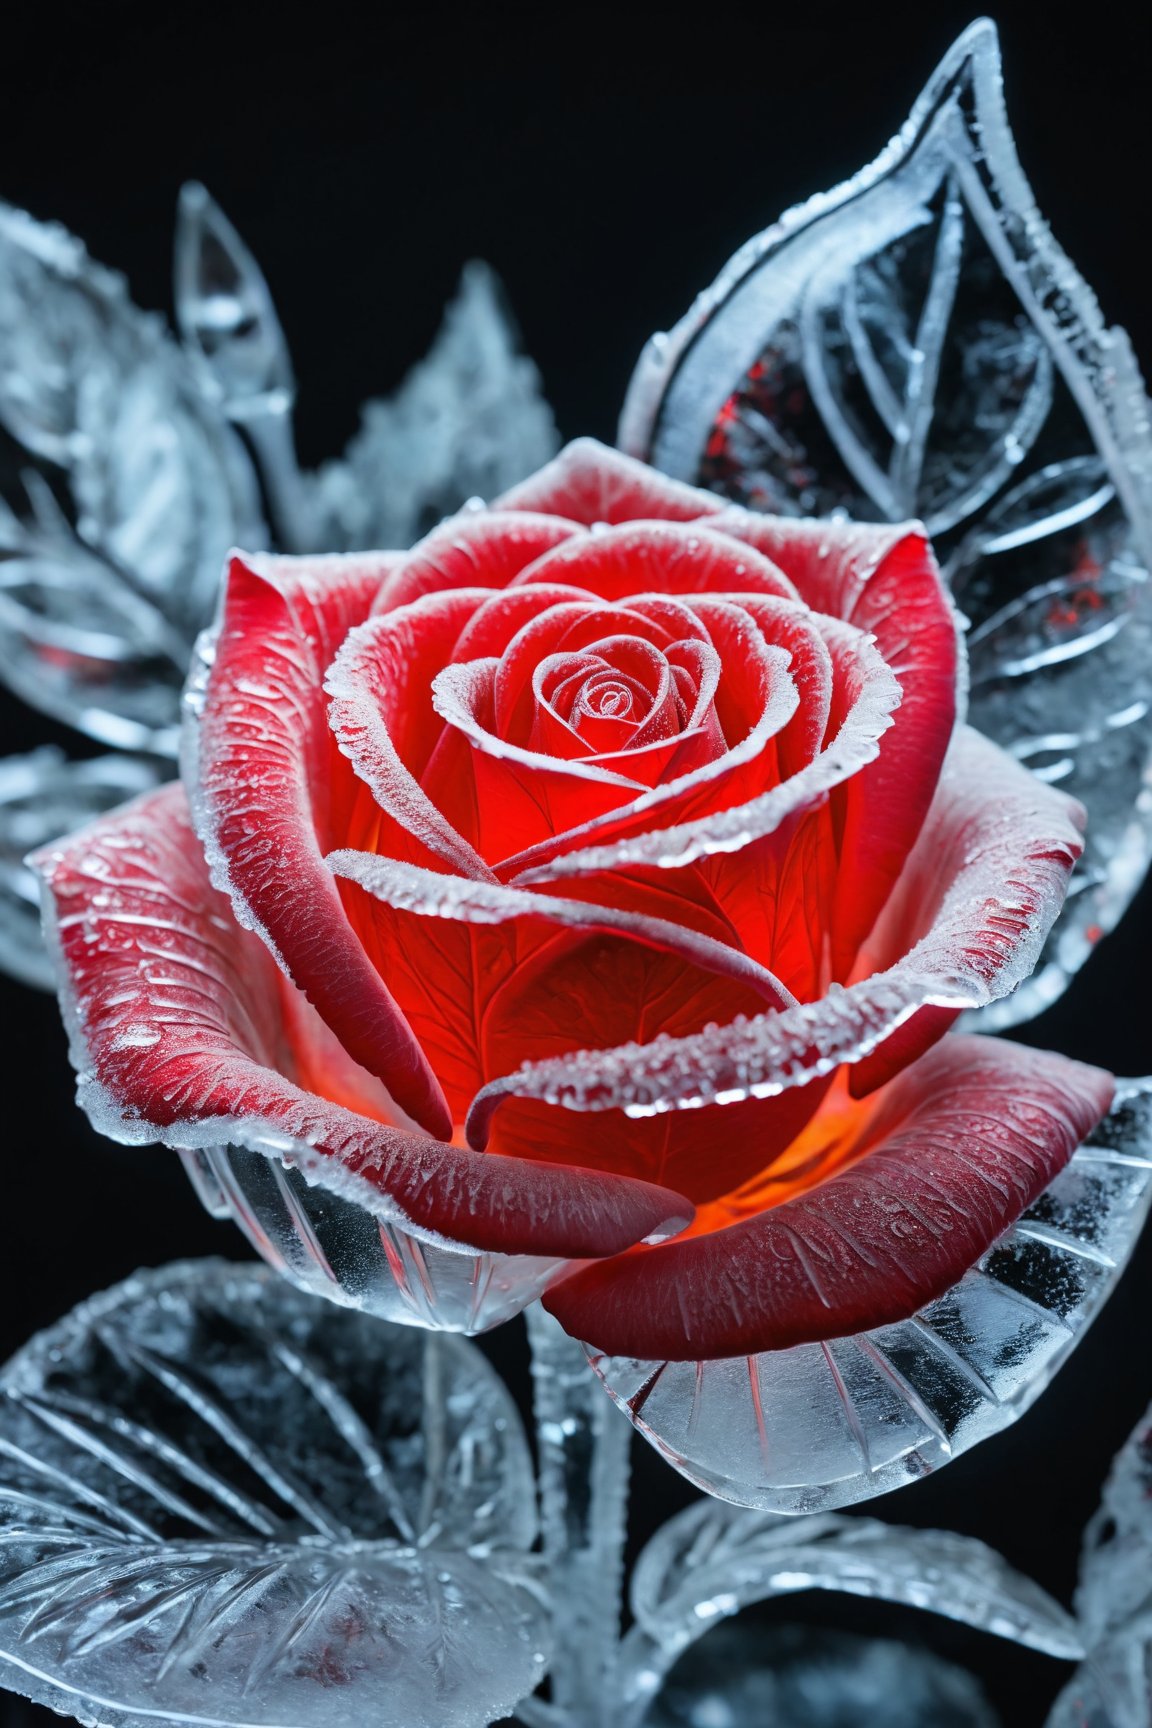 a rose made out of ice in the style of ice art, icy, ice carving, frozen art, translucent sculpture, ice texture, ice replica, glowing red neon color palette